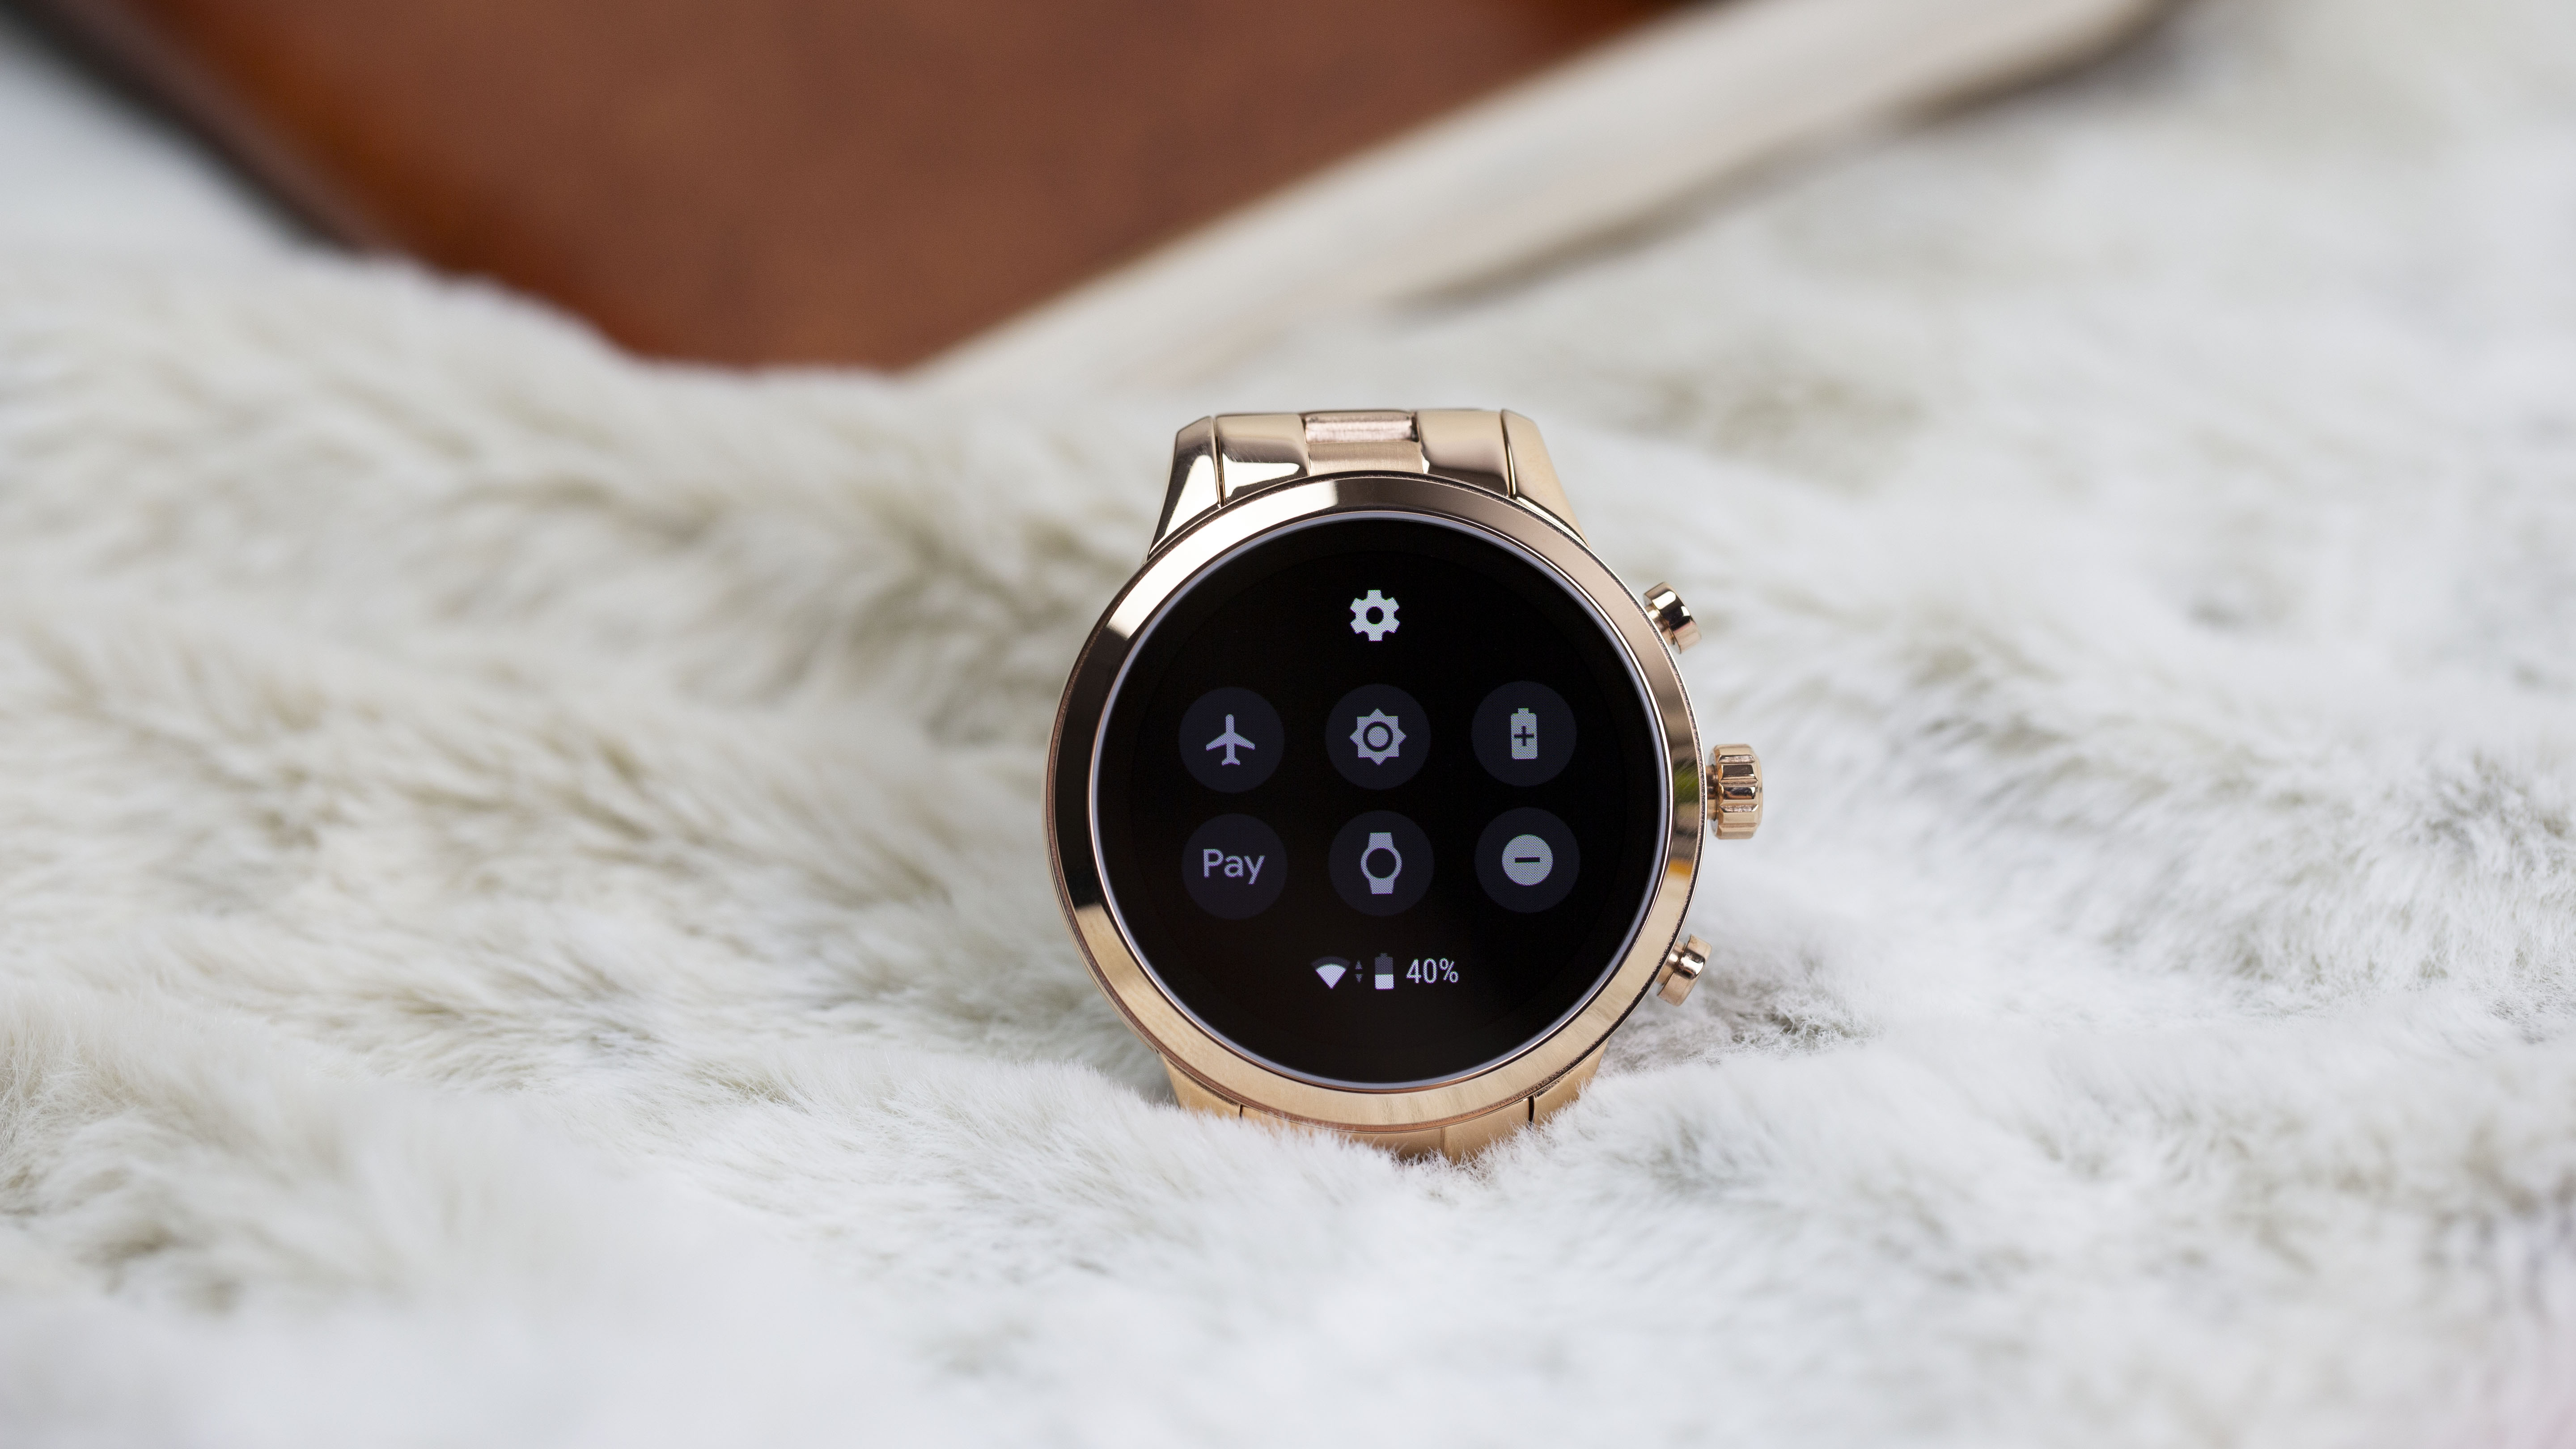 louis vuitton Tambour Horizon smartwatch 2019 edition announced with  Snapdragon Wear 3100 